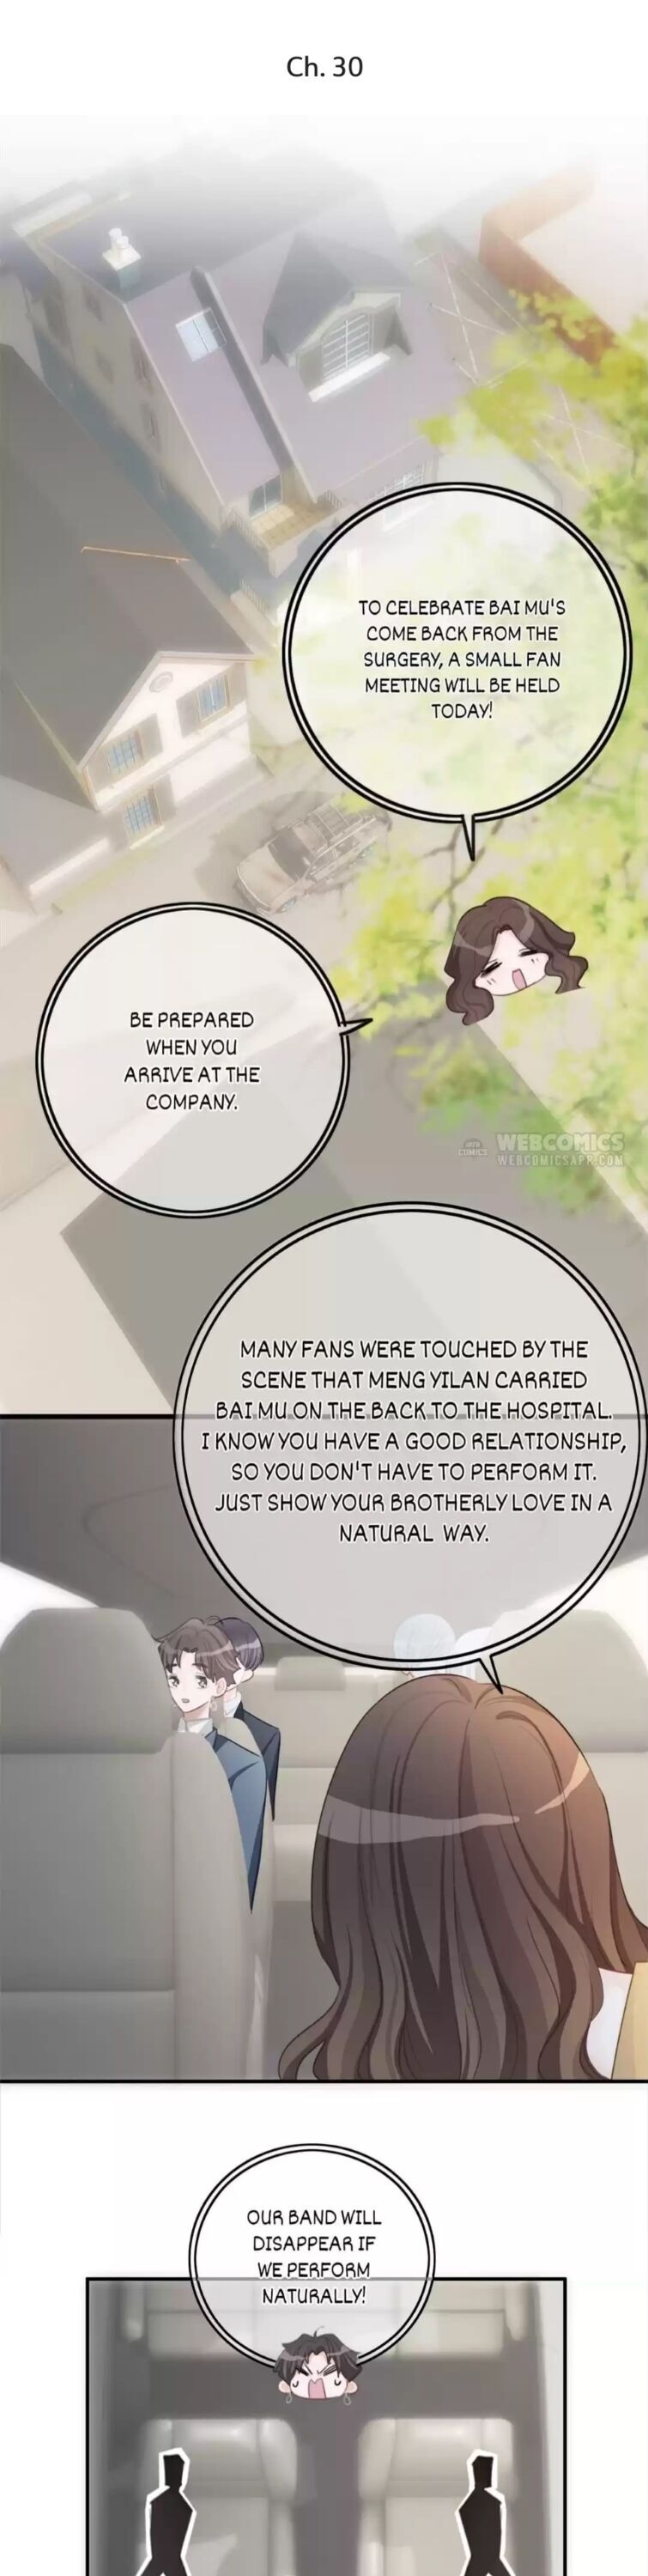 Superficial Relationship - Page 1